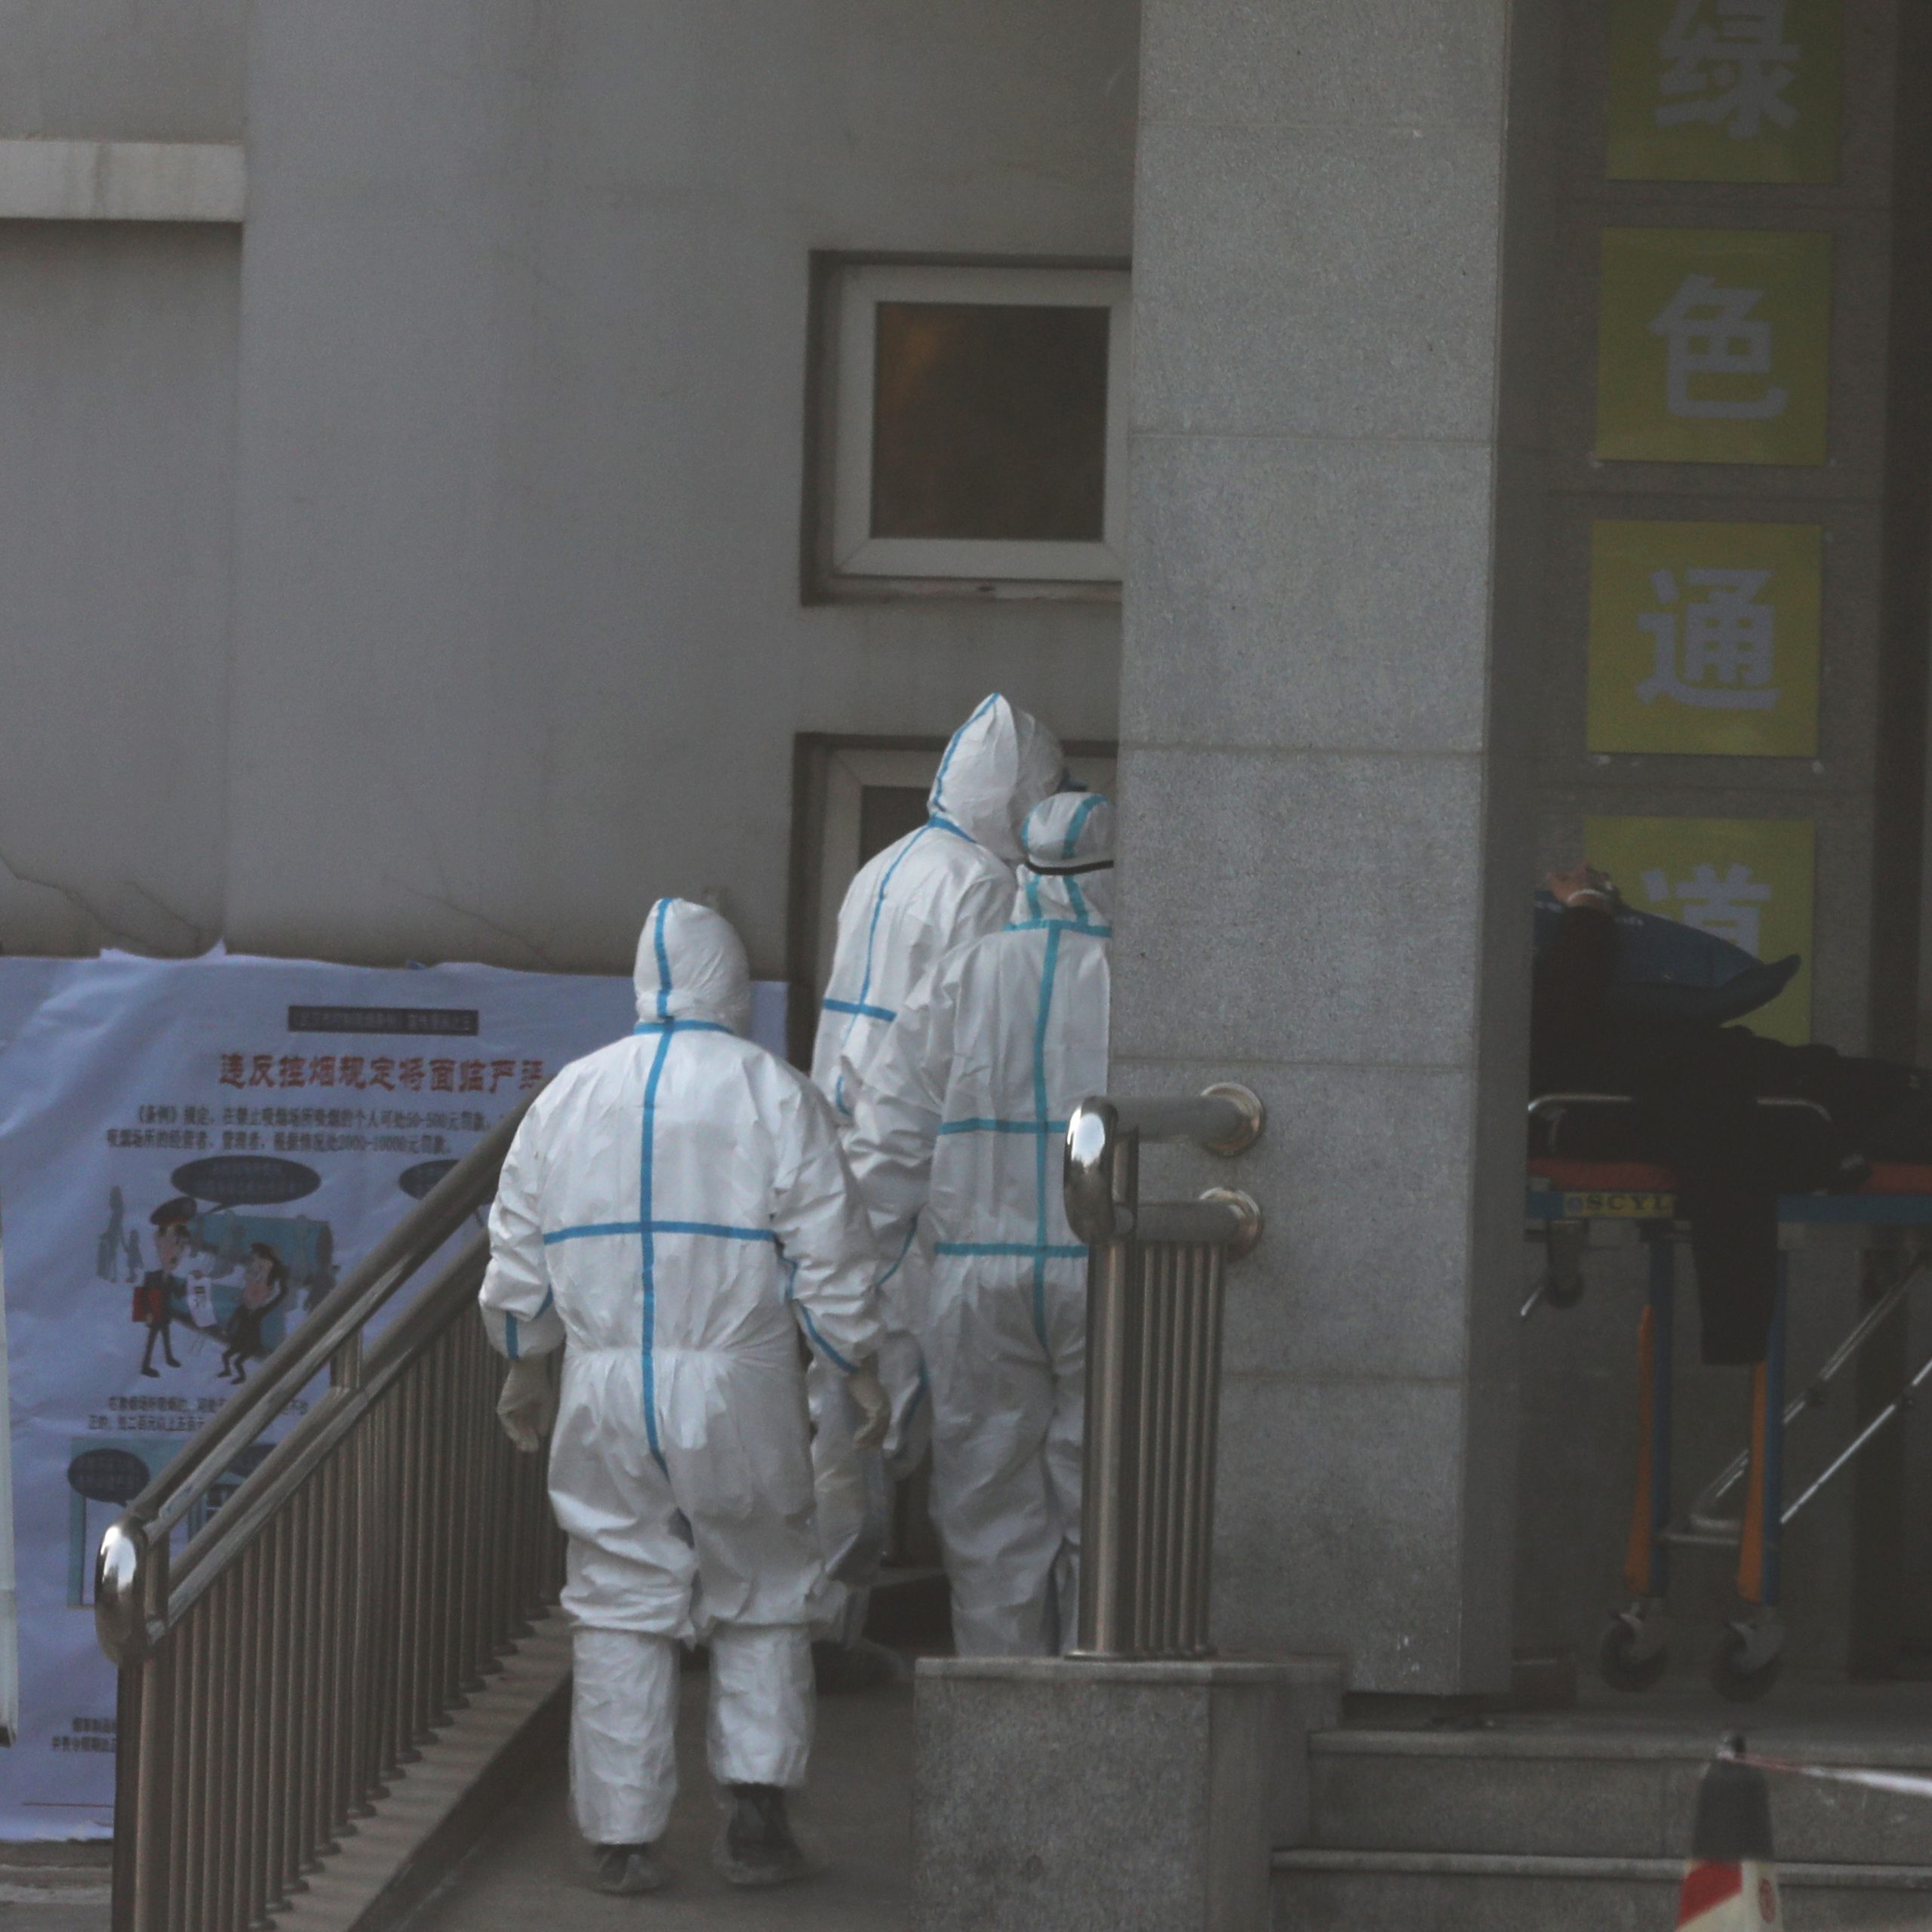 200+ cases of Wuhan pneumonia in China, 4 dead. It might get a lot